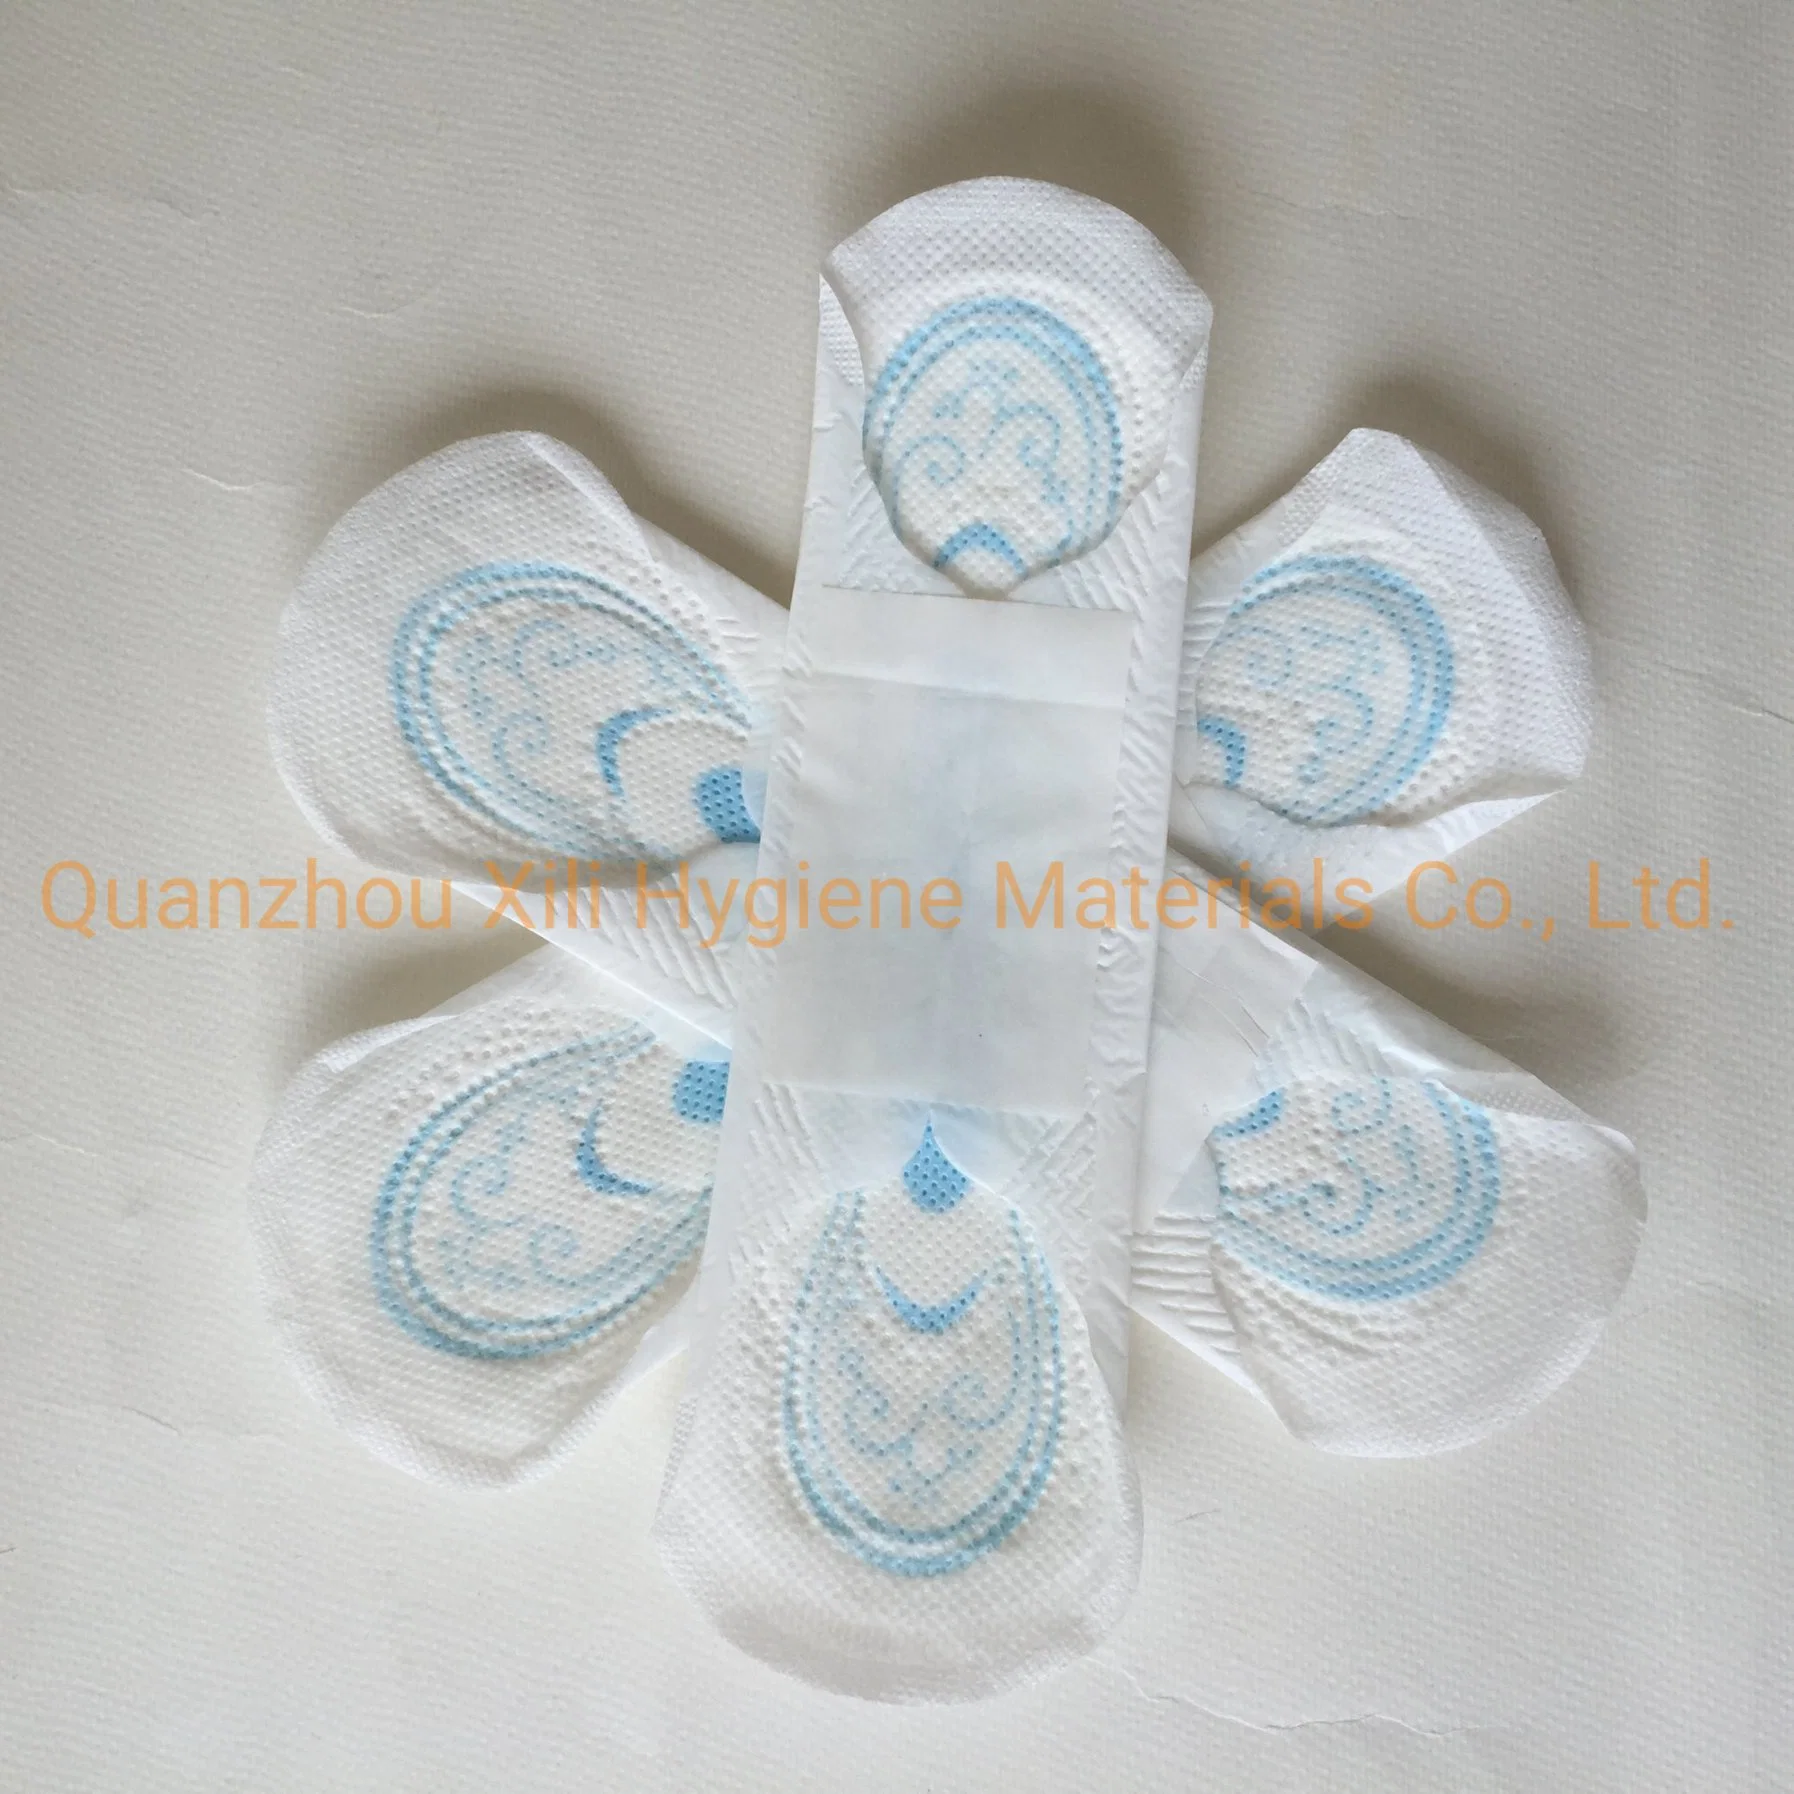 Anion Sanitary Napkins with High Absorbtion From Sanitary Napkins Factory